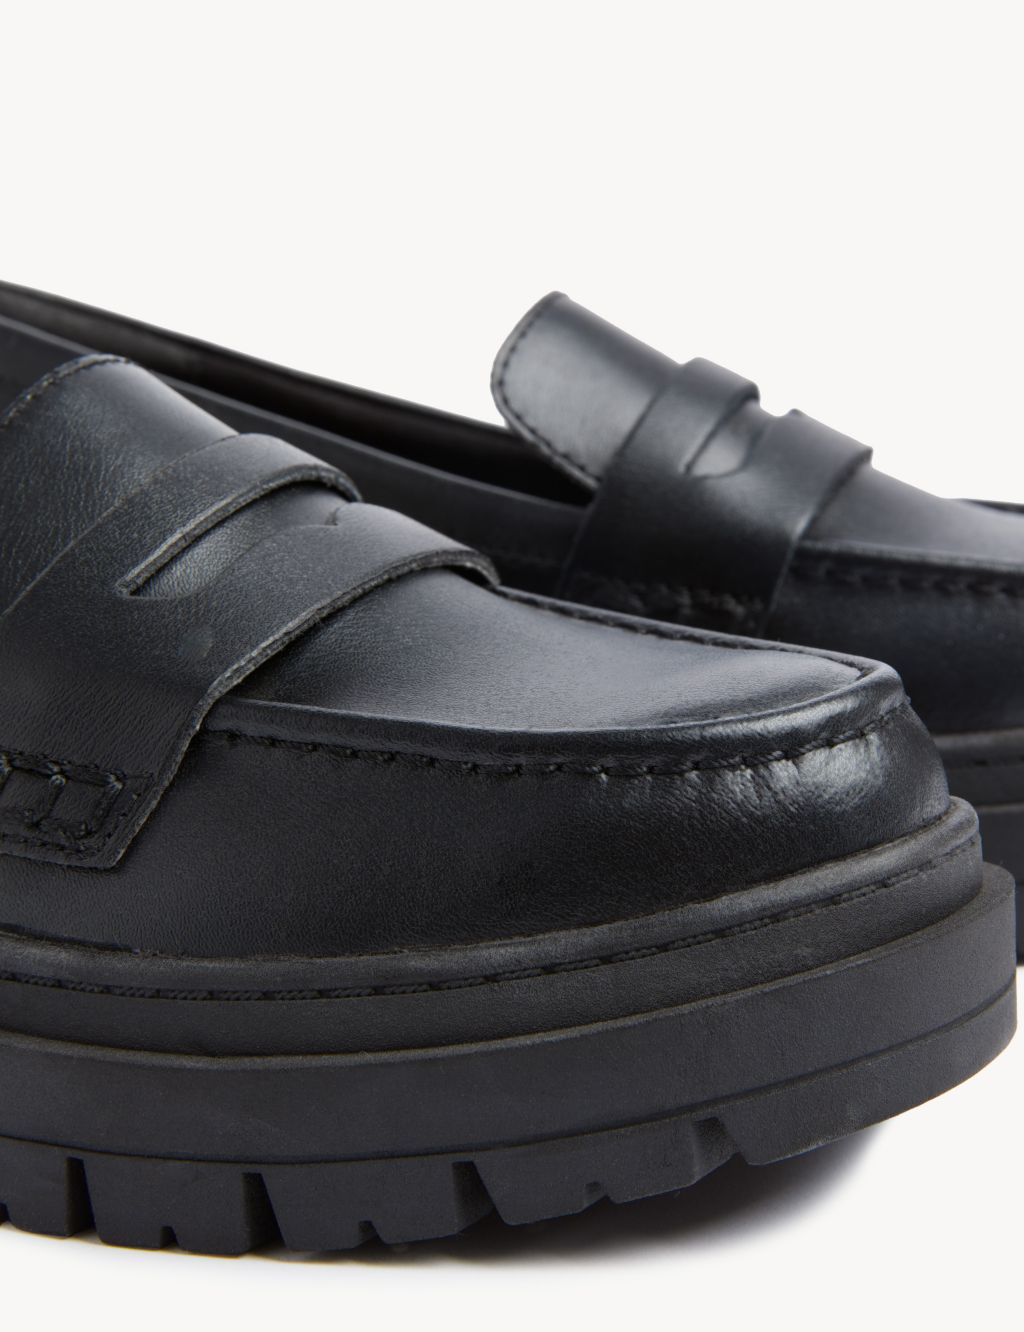 Kids' Leather Chunky School Loafer (13 Small - 7 Large) image 2